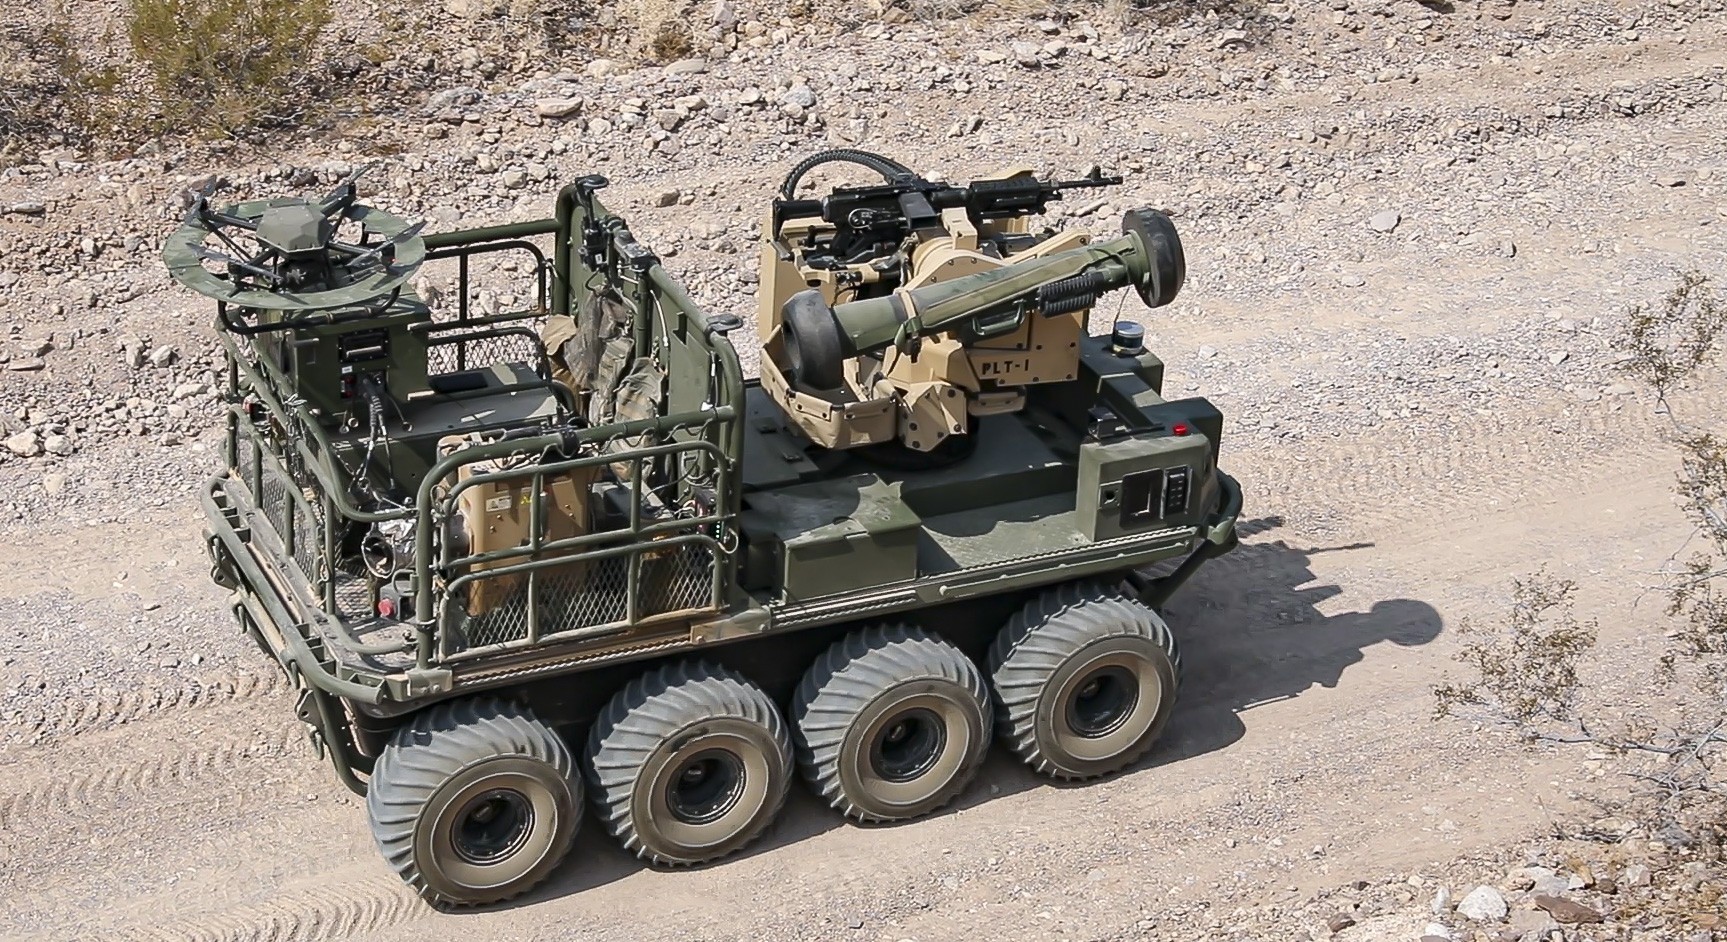 MUTT configured with Javelin anti-tank missiles.